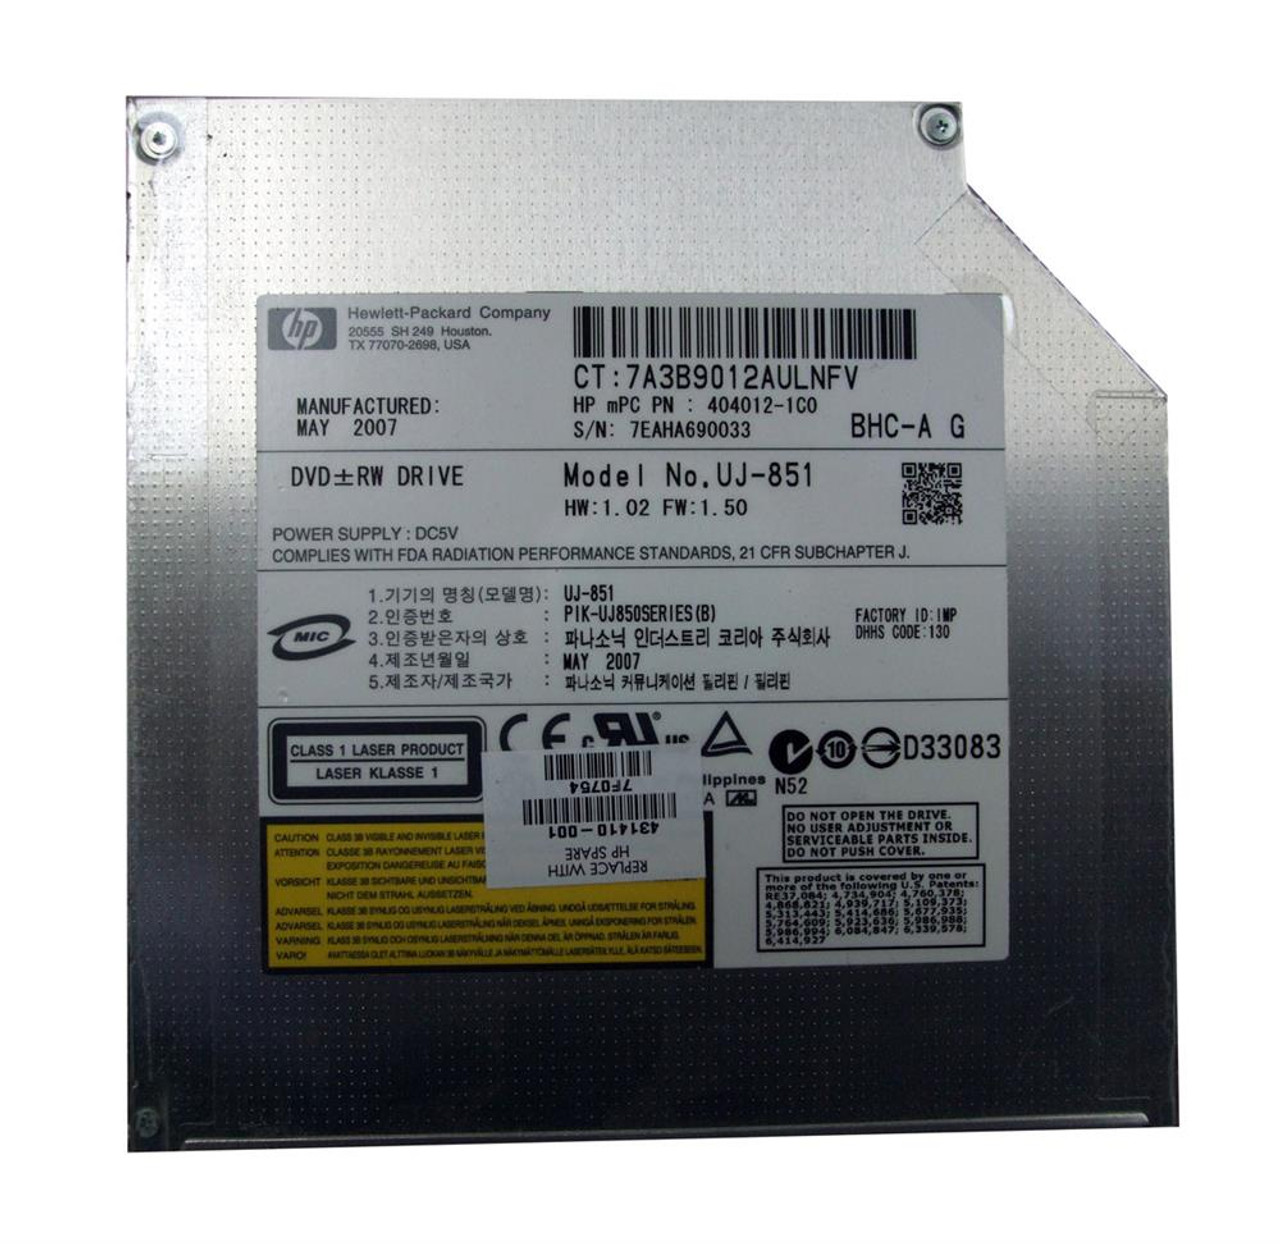 404012-1C0 - HP 8x DVD+R/RW Super Multi Double-Layer Dual Format LightScribe IDE Optical Drive for HP Pavilion DV2000/DV9000 Series Notebook